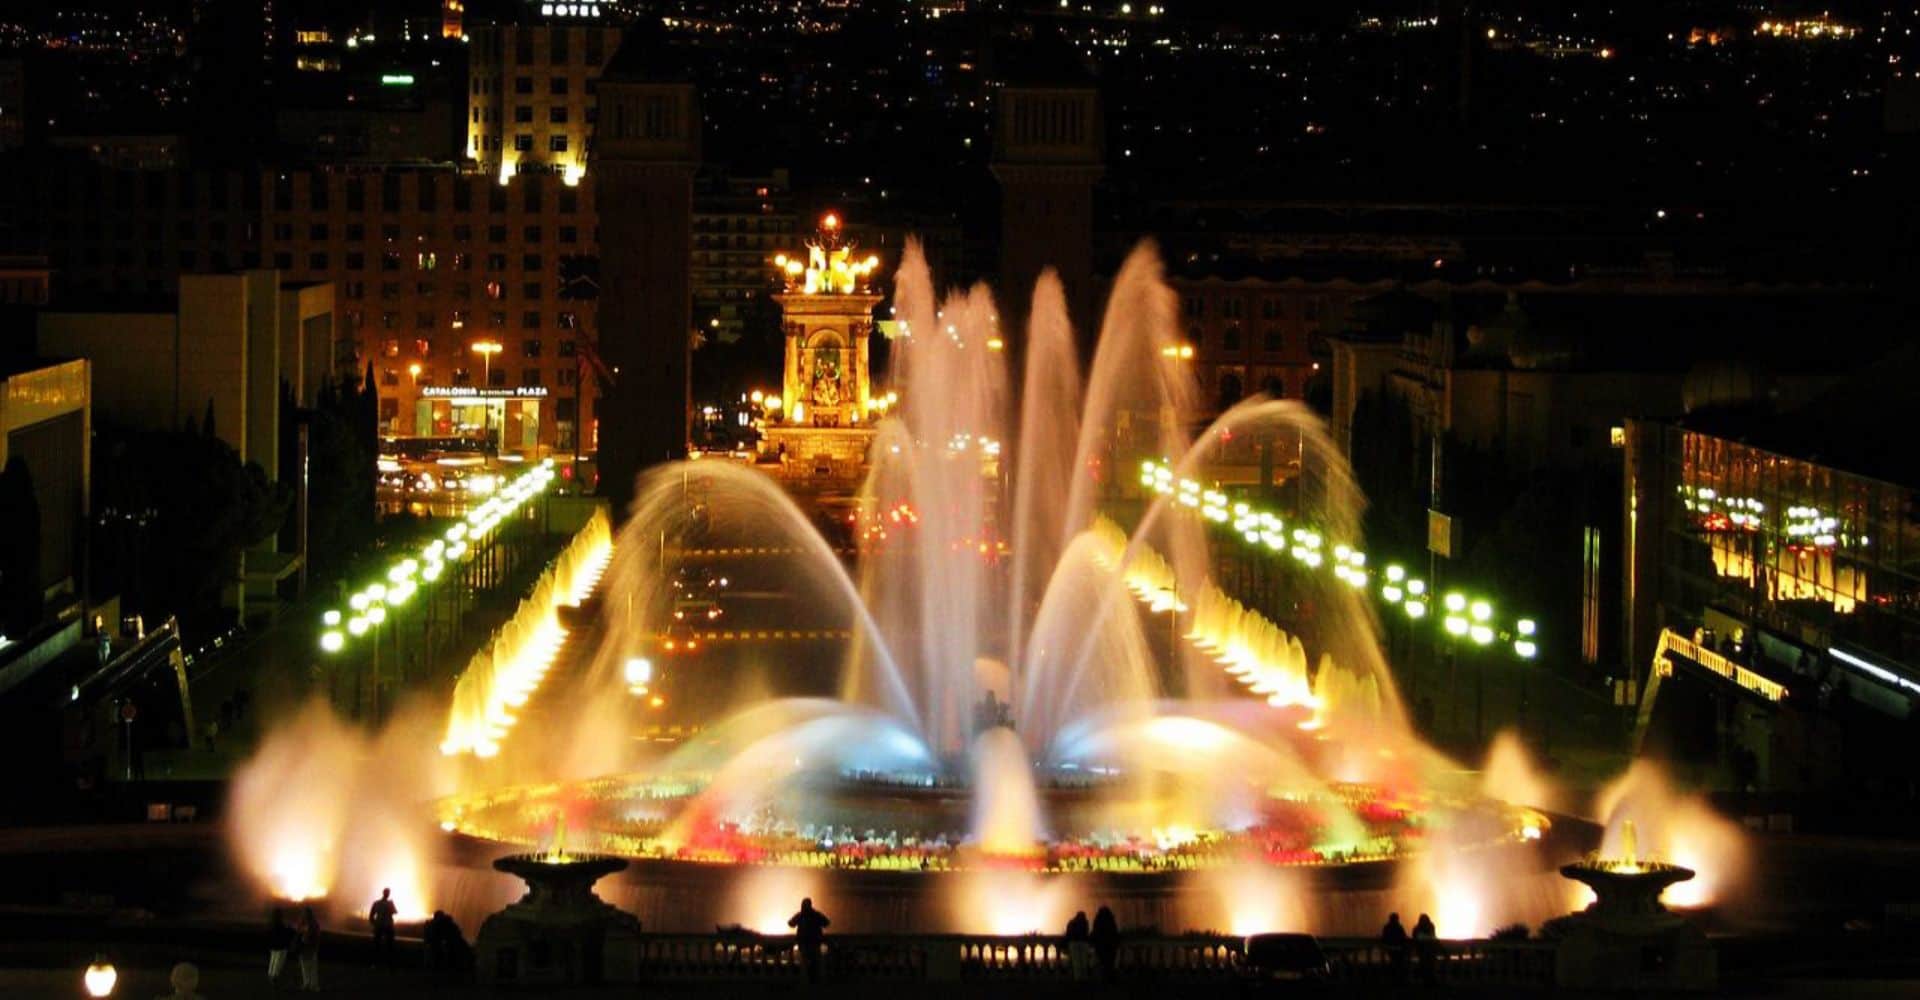 Barcelona Old Town with Montjuic Castle, Cable Car and Magic Fountain Show Small Group Tour - In out Barcelona Tours